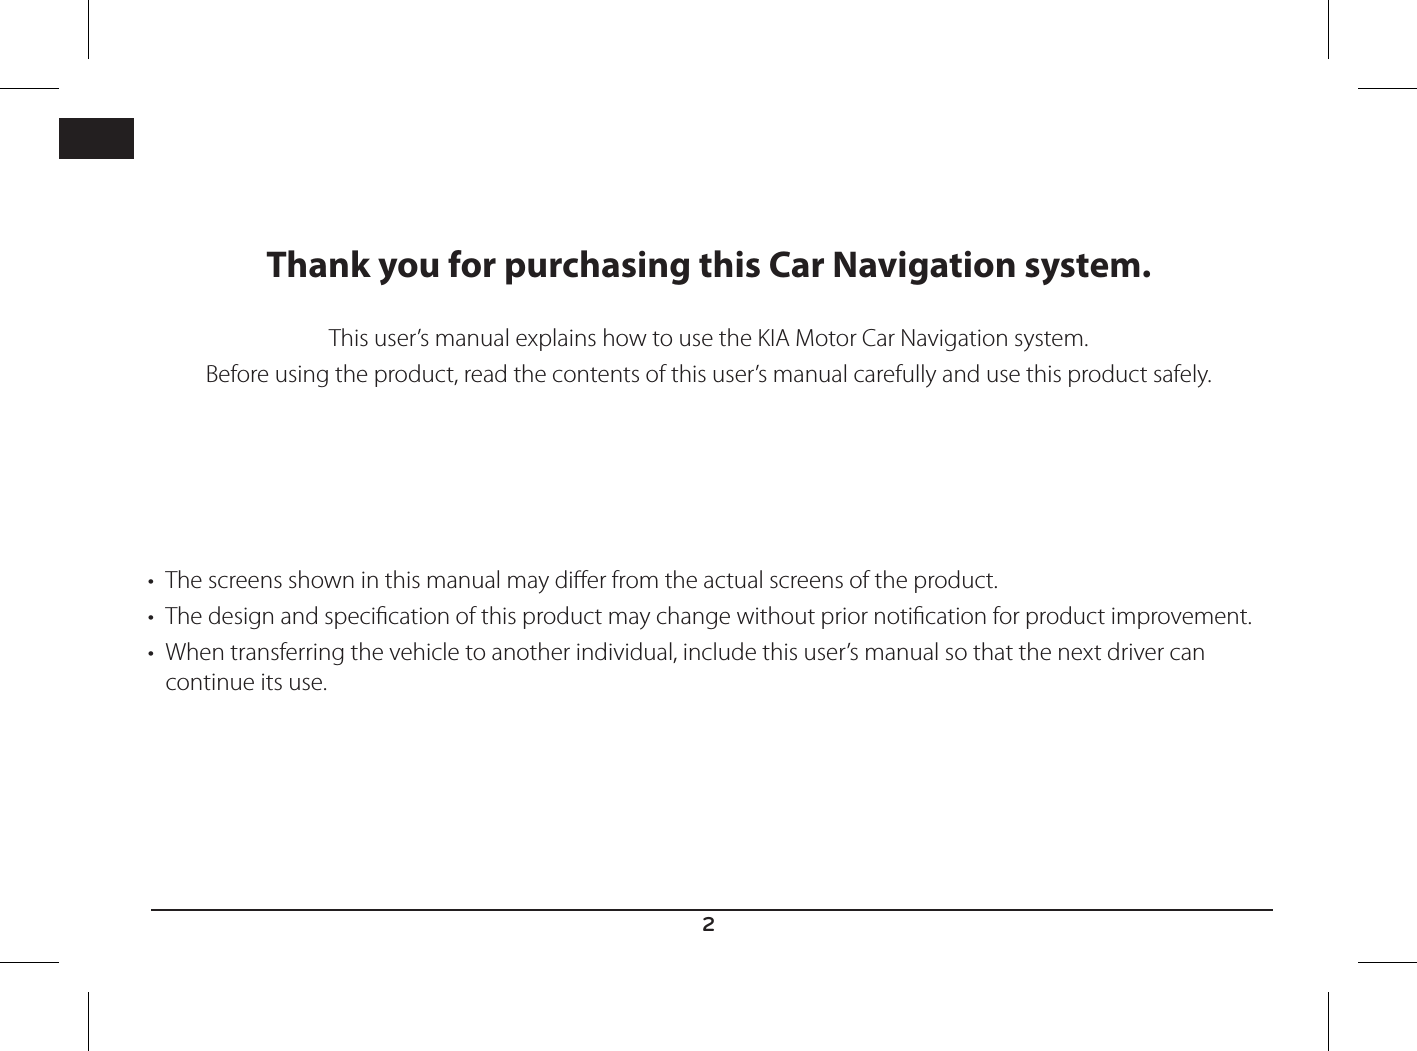 2ENGThank you for purchasing this Car Navigation system.This user’s manual explains how to use the KIA Motor Car Navigation system.Before using the product, read the contents of this user’s manual carefully and use this product safely.• The screens shown in this manual may dier from the actual screens of the product.• The design and specication of this product may change without prior notication for product improvement.• When transferring the vehicle to another individual, include this user’s manual so that the next driver can continue its use.    